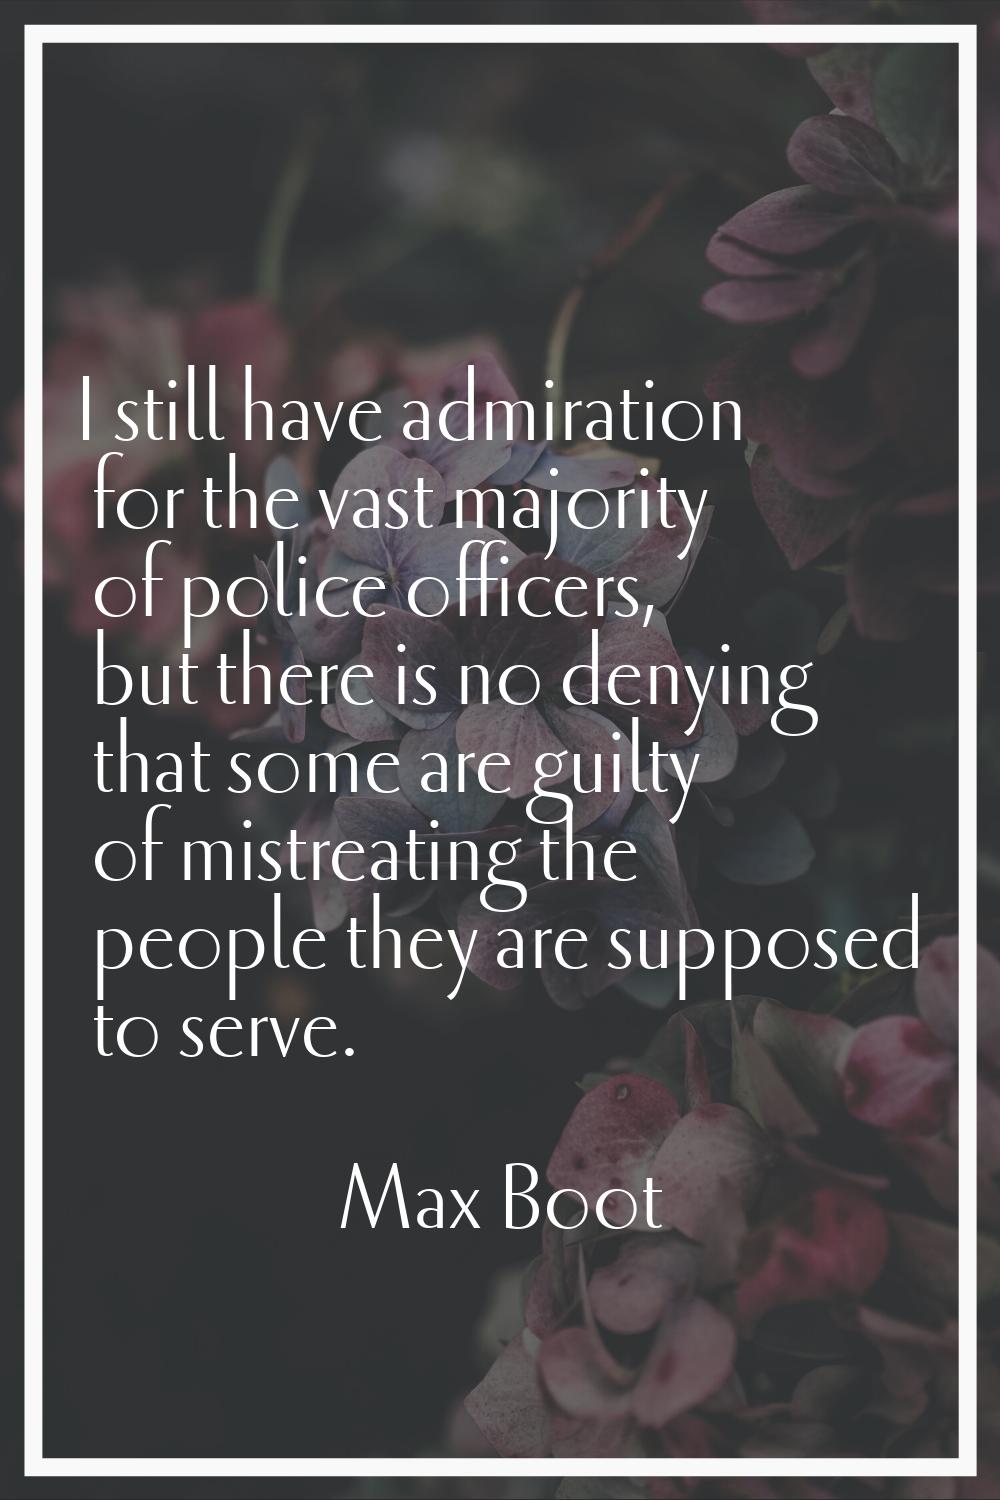 I still have admiration for the vast majority of police officers, but there is no denying that some